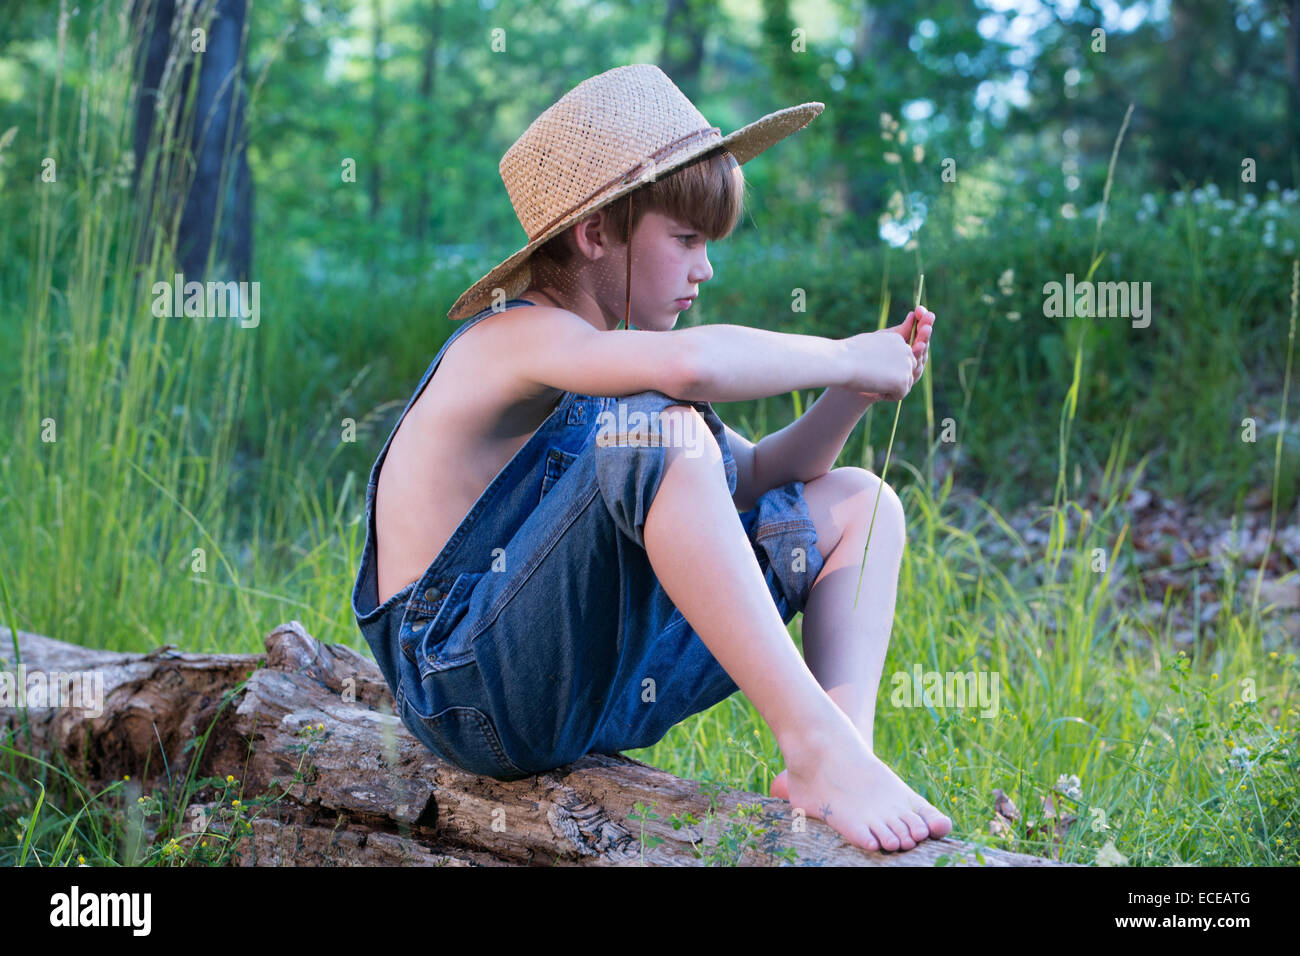 Young boy wearing straw hat sitting on log Banque D'Images